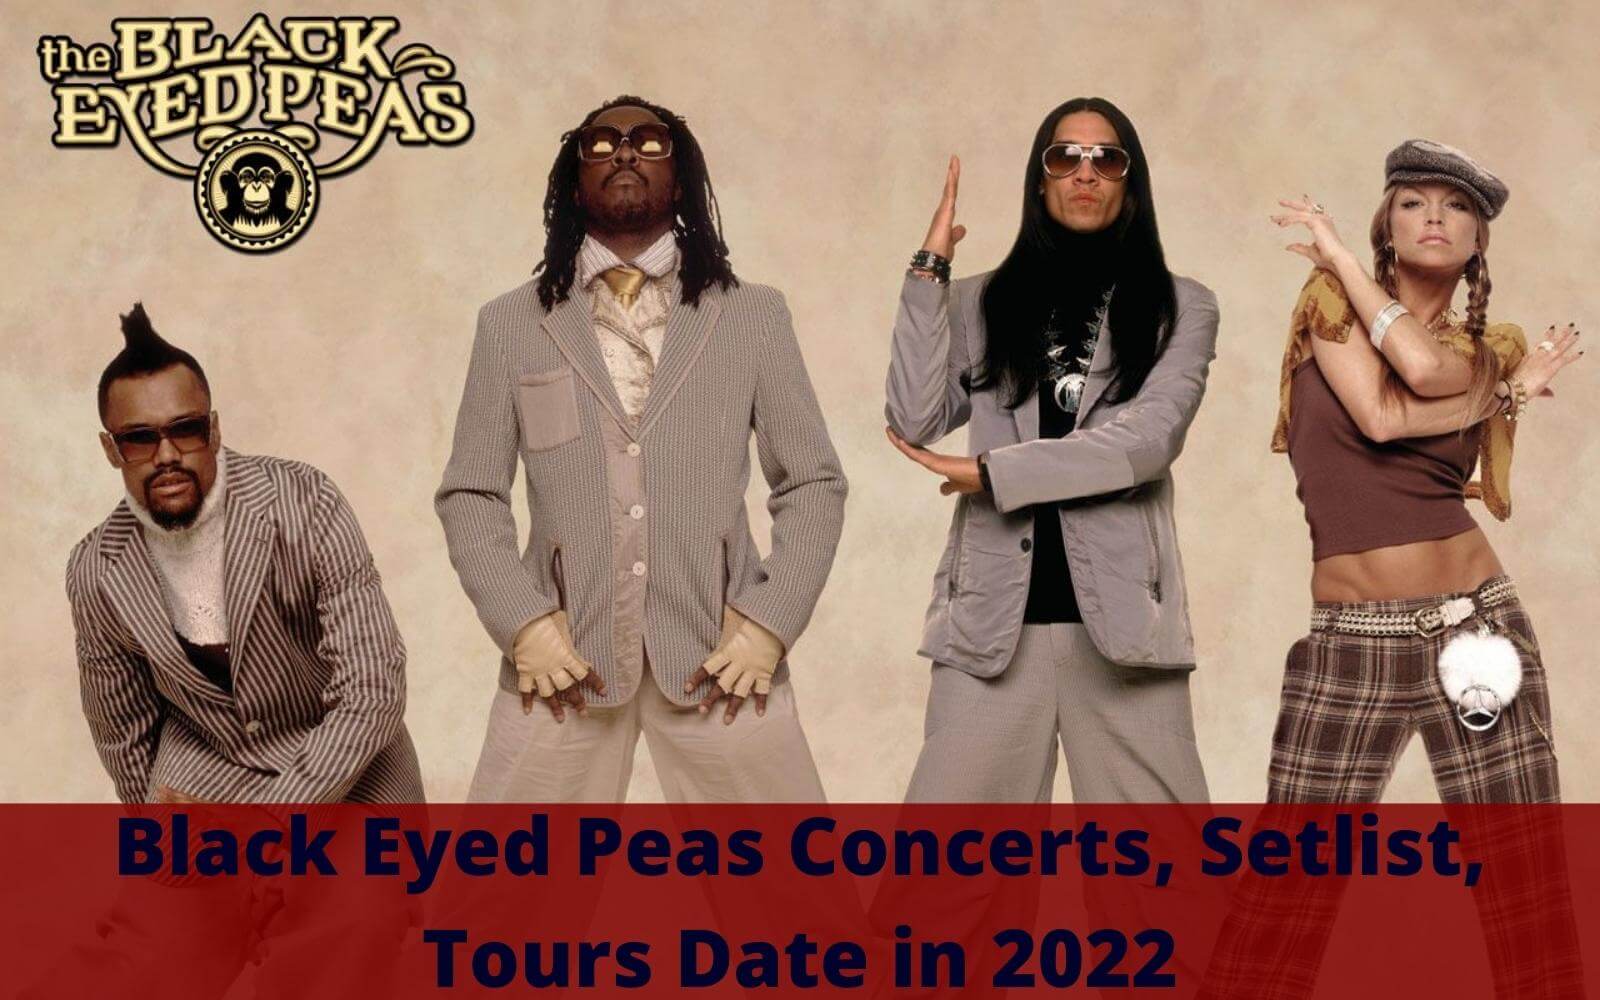 Black Eyed Peas Setlist 2022 Concerts, Tours Date in 2022 Europe